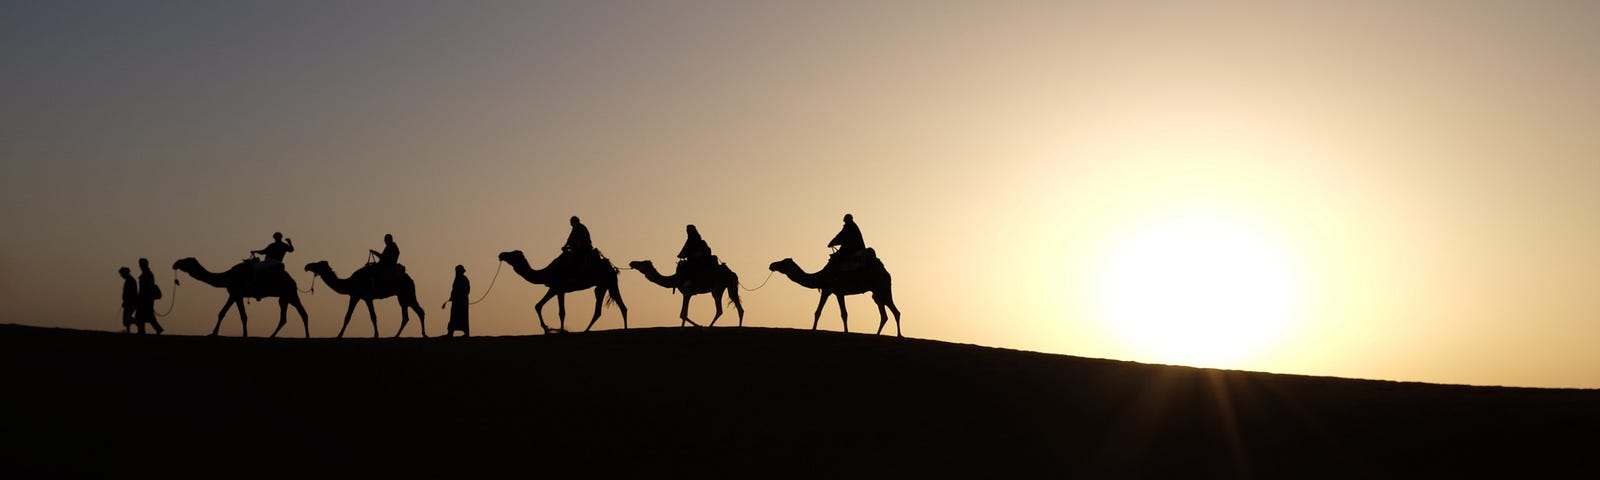 Three men on camels on horizon with two other camels in tow.